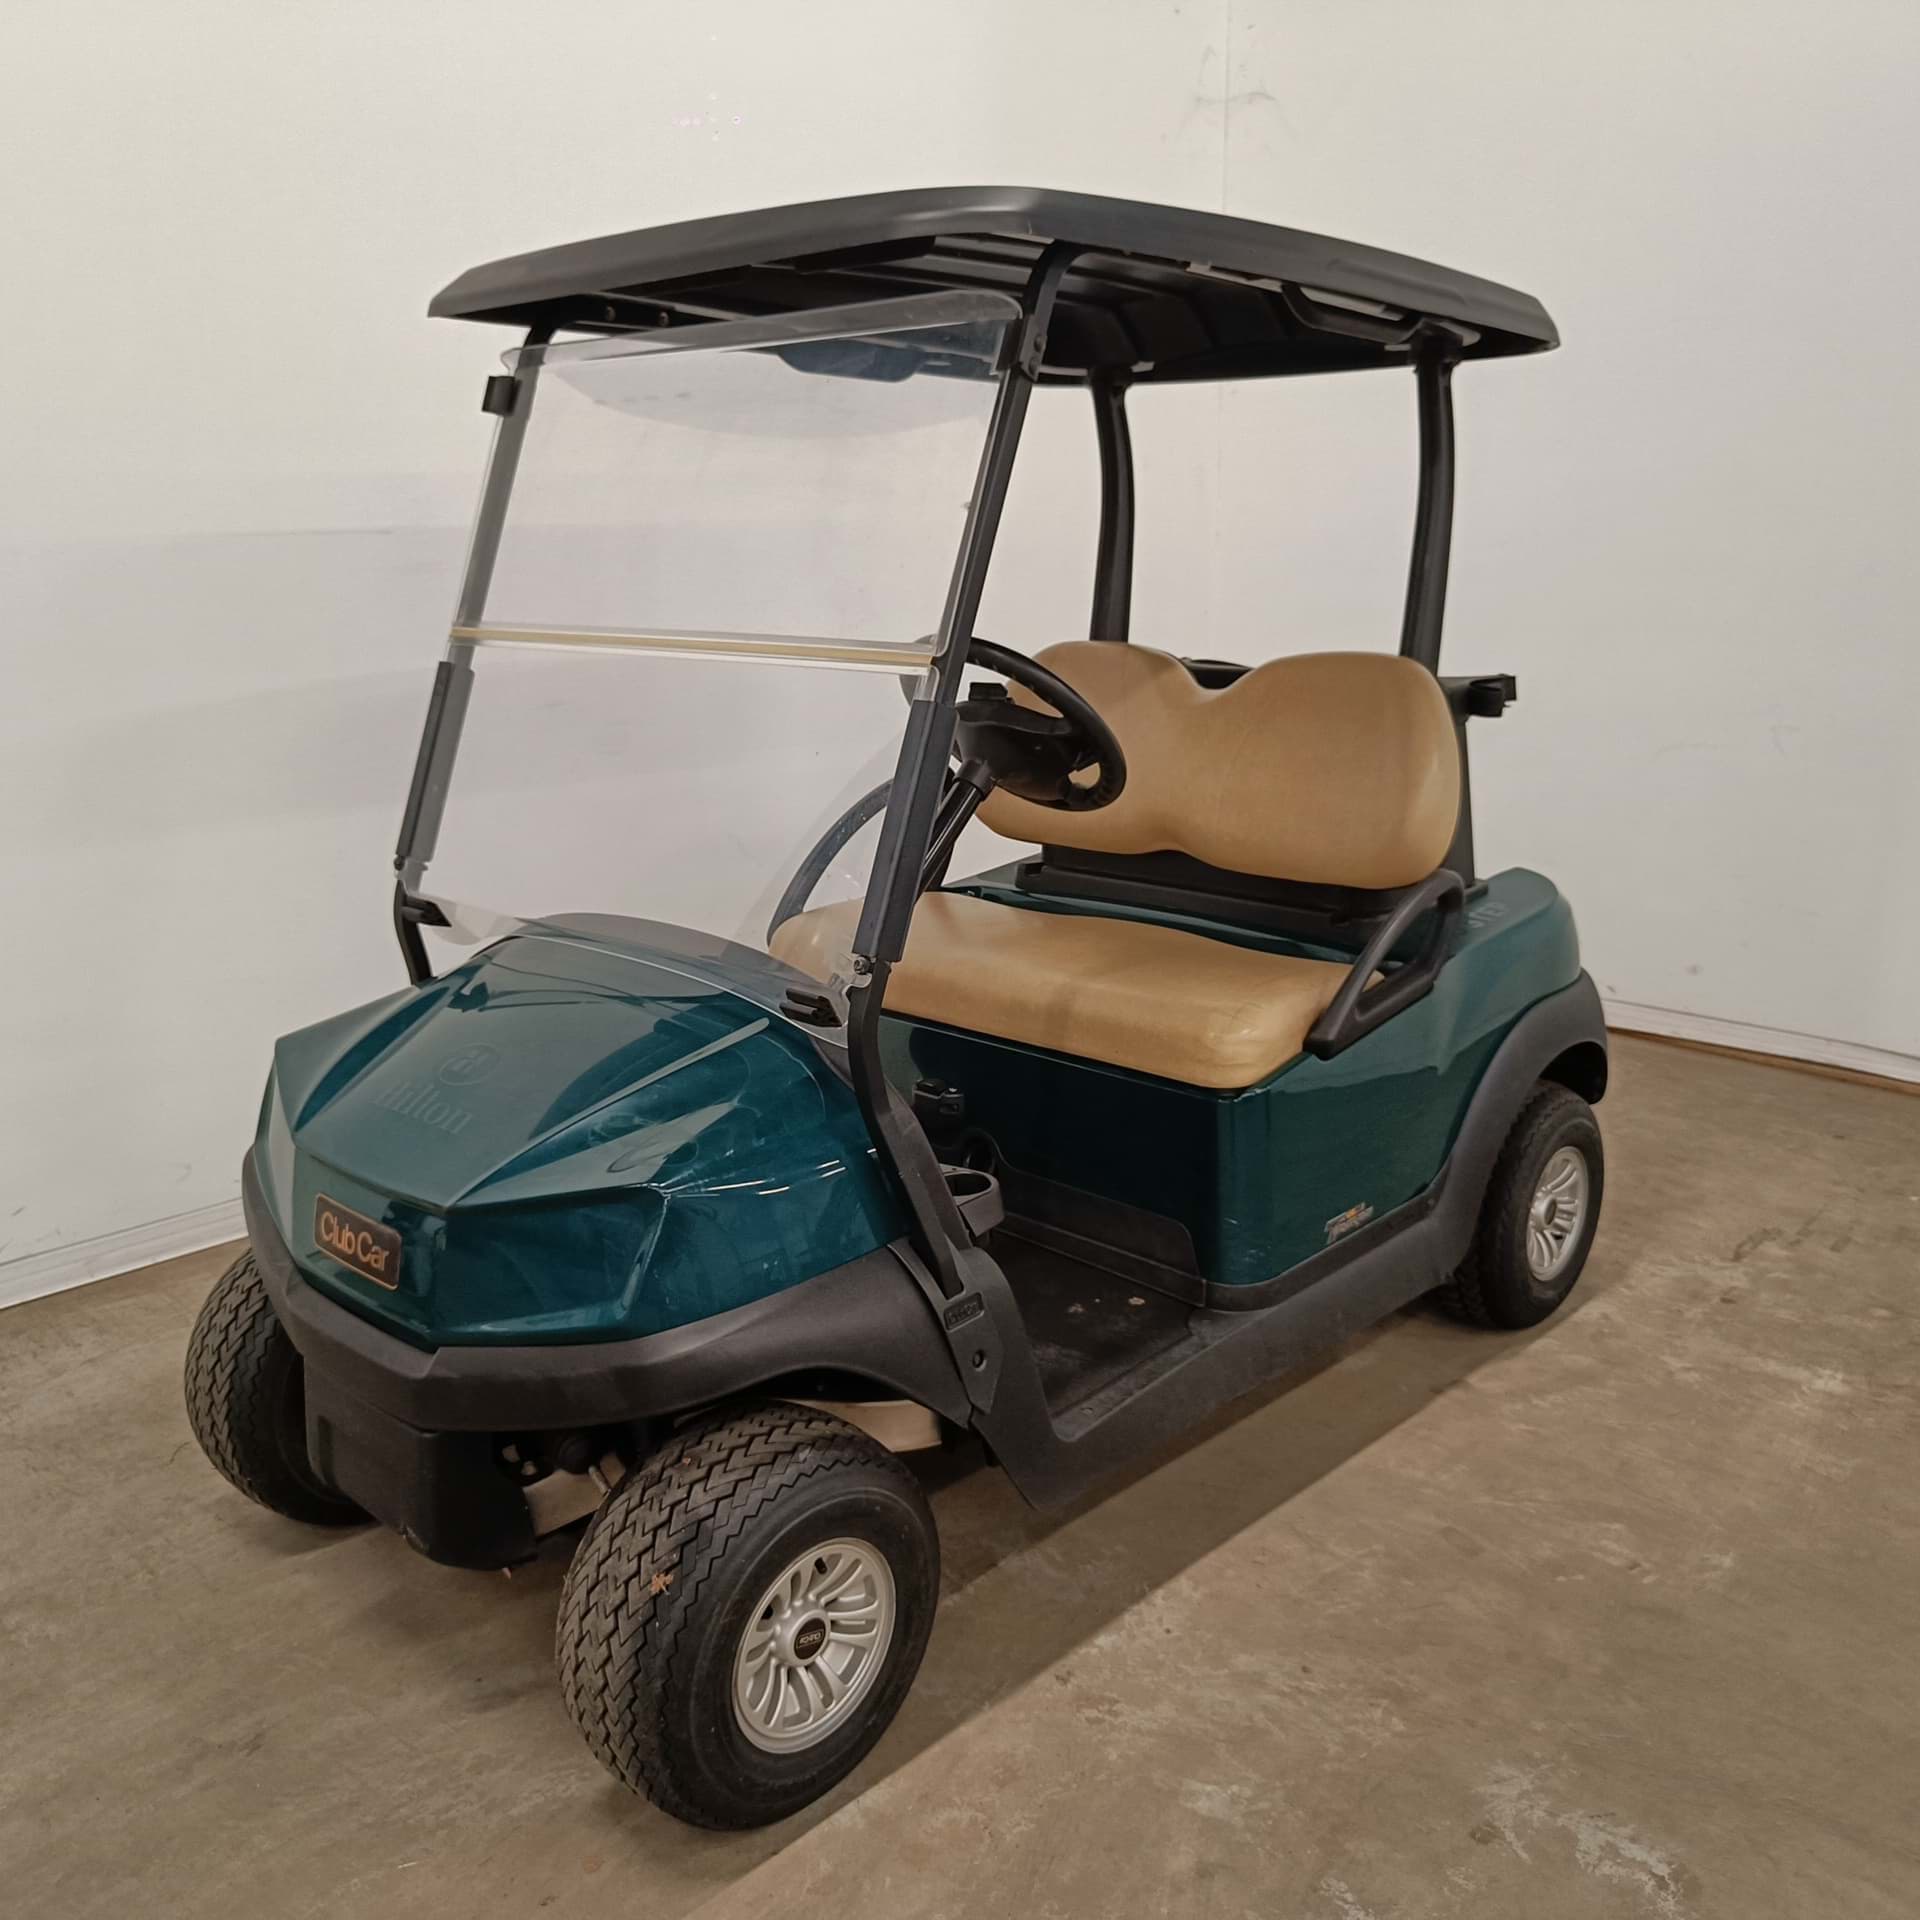 Picture of Trade - 2019 - Electric lithium - Club Car - Tempo - 2 seater - Green